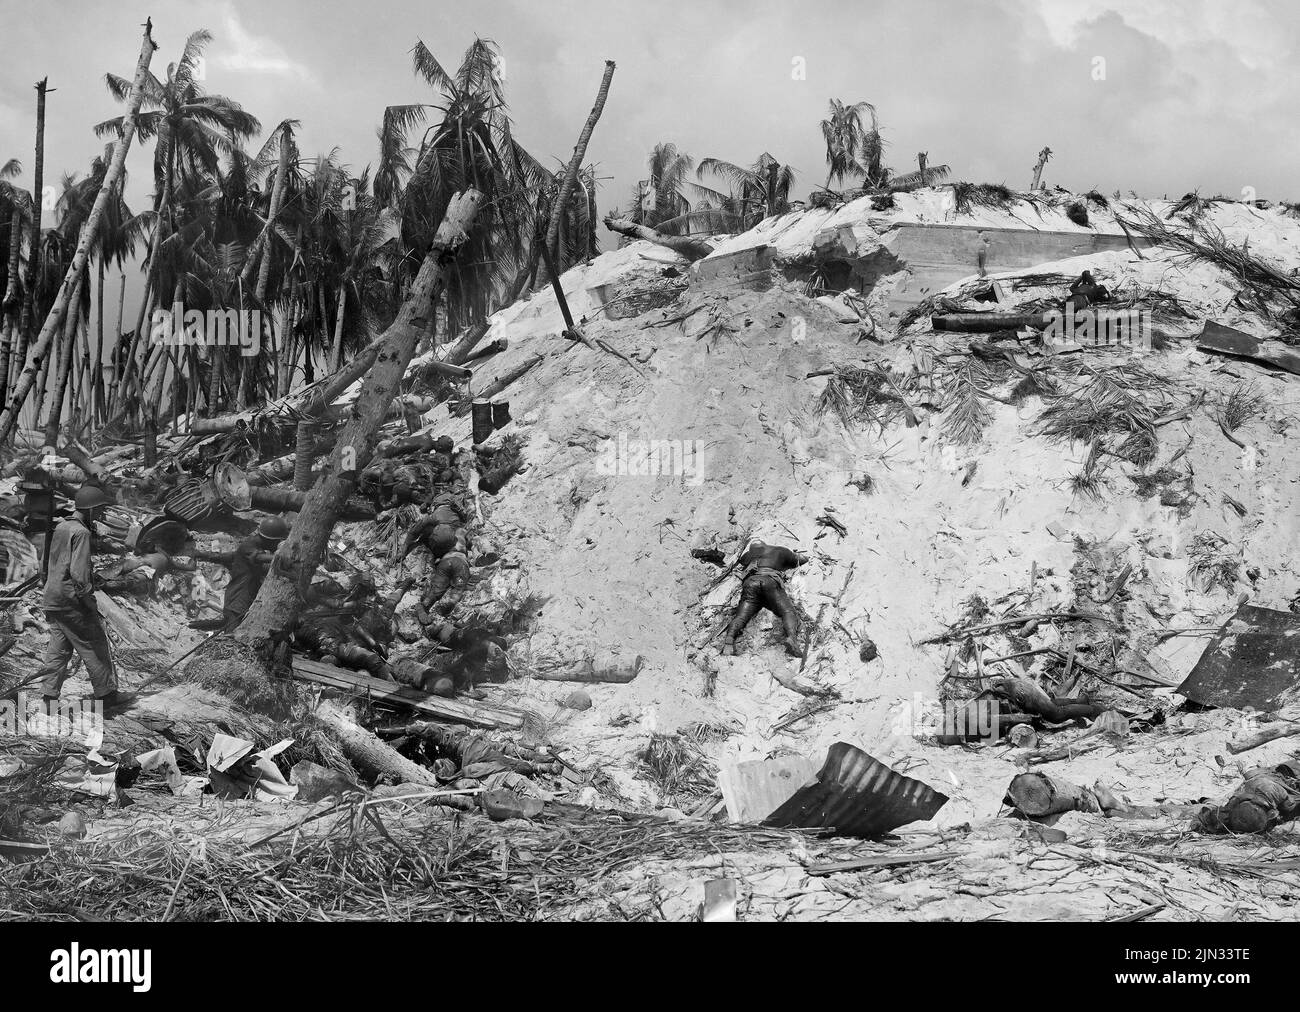 A photograph of dead Japanese soldiers after the battle of Tarawa. The landings on Tarawa were part of the US offensive against the Pacific Islands held by Japan before preparing for an assault on the Japanese mainland. Of the 2636 Japanese troops on the island, only 17 were alive at the end. Stock Photo